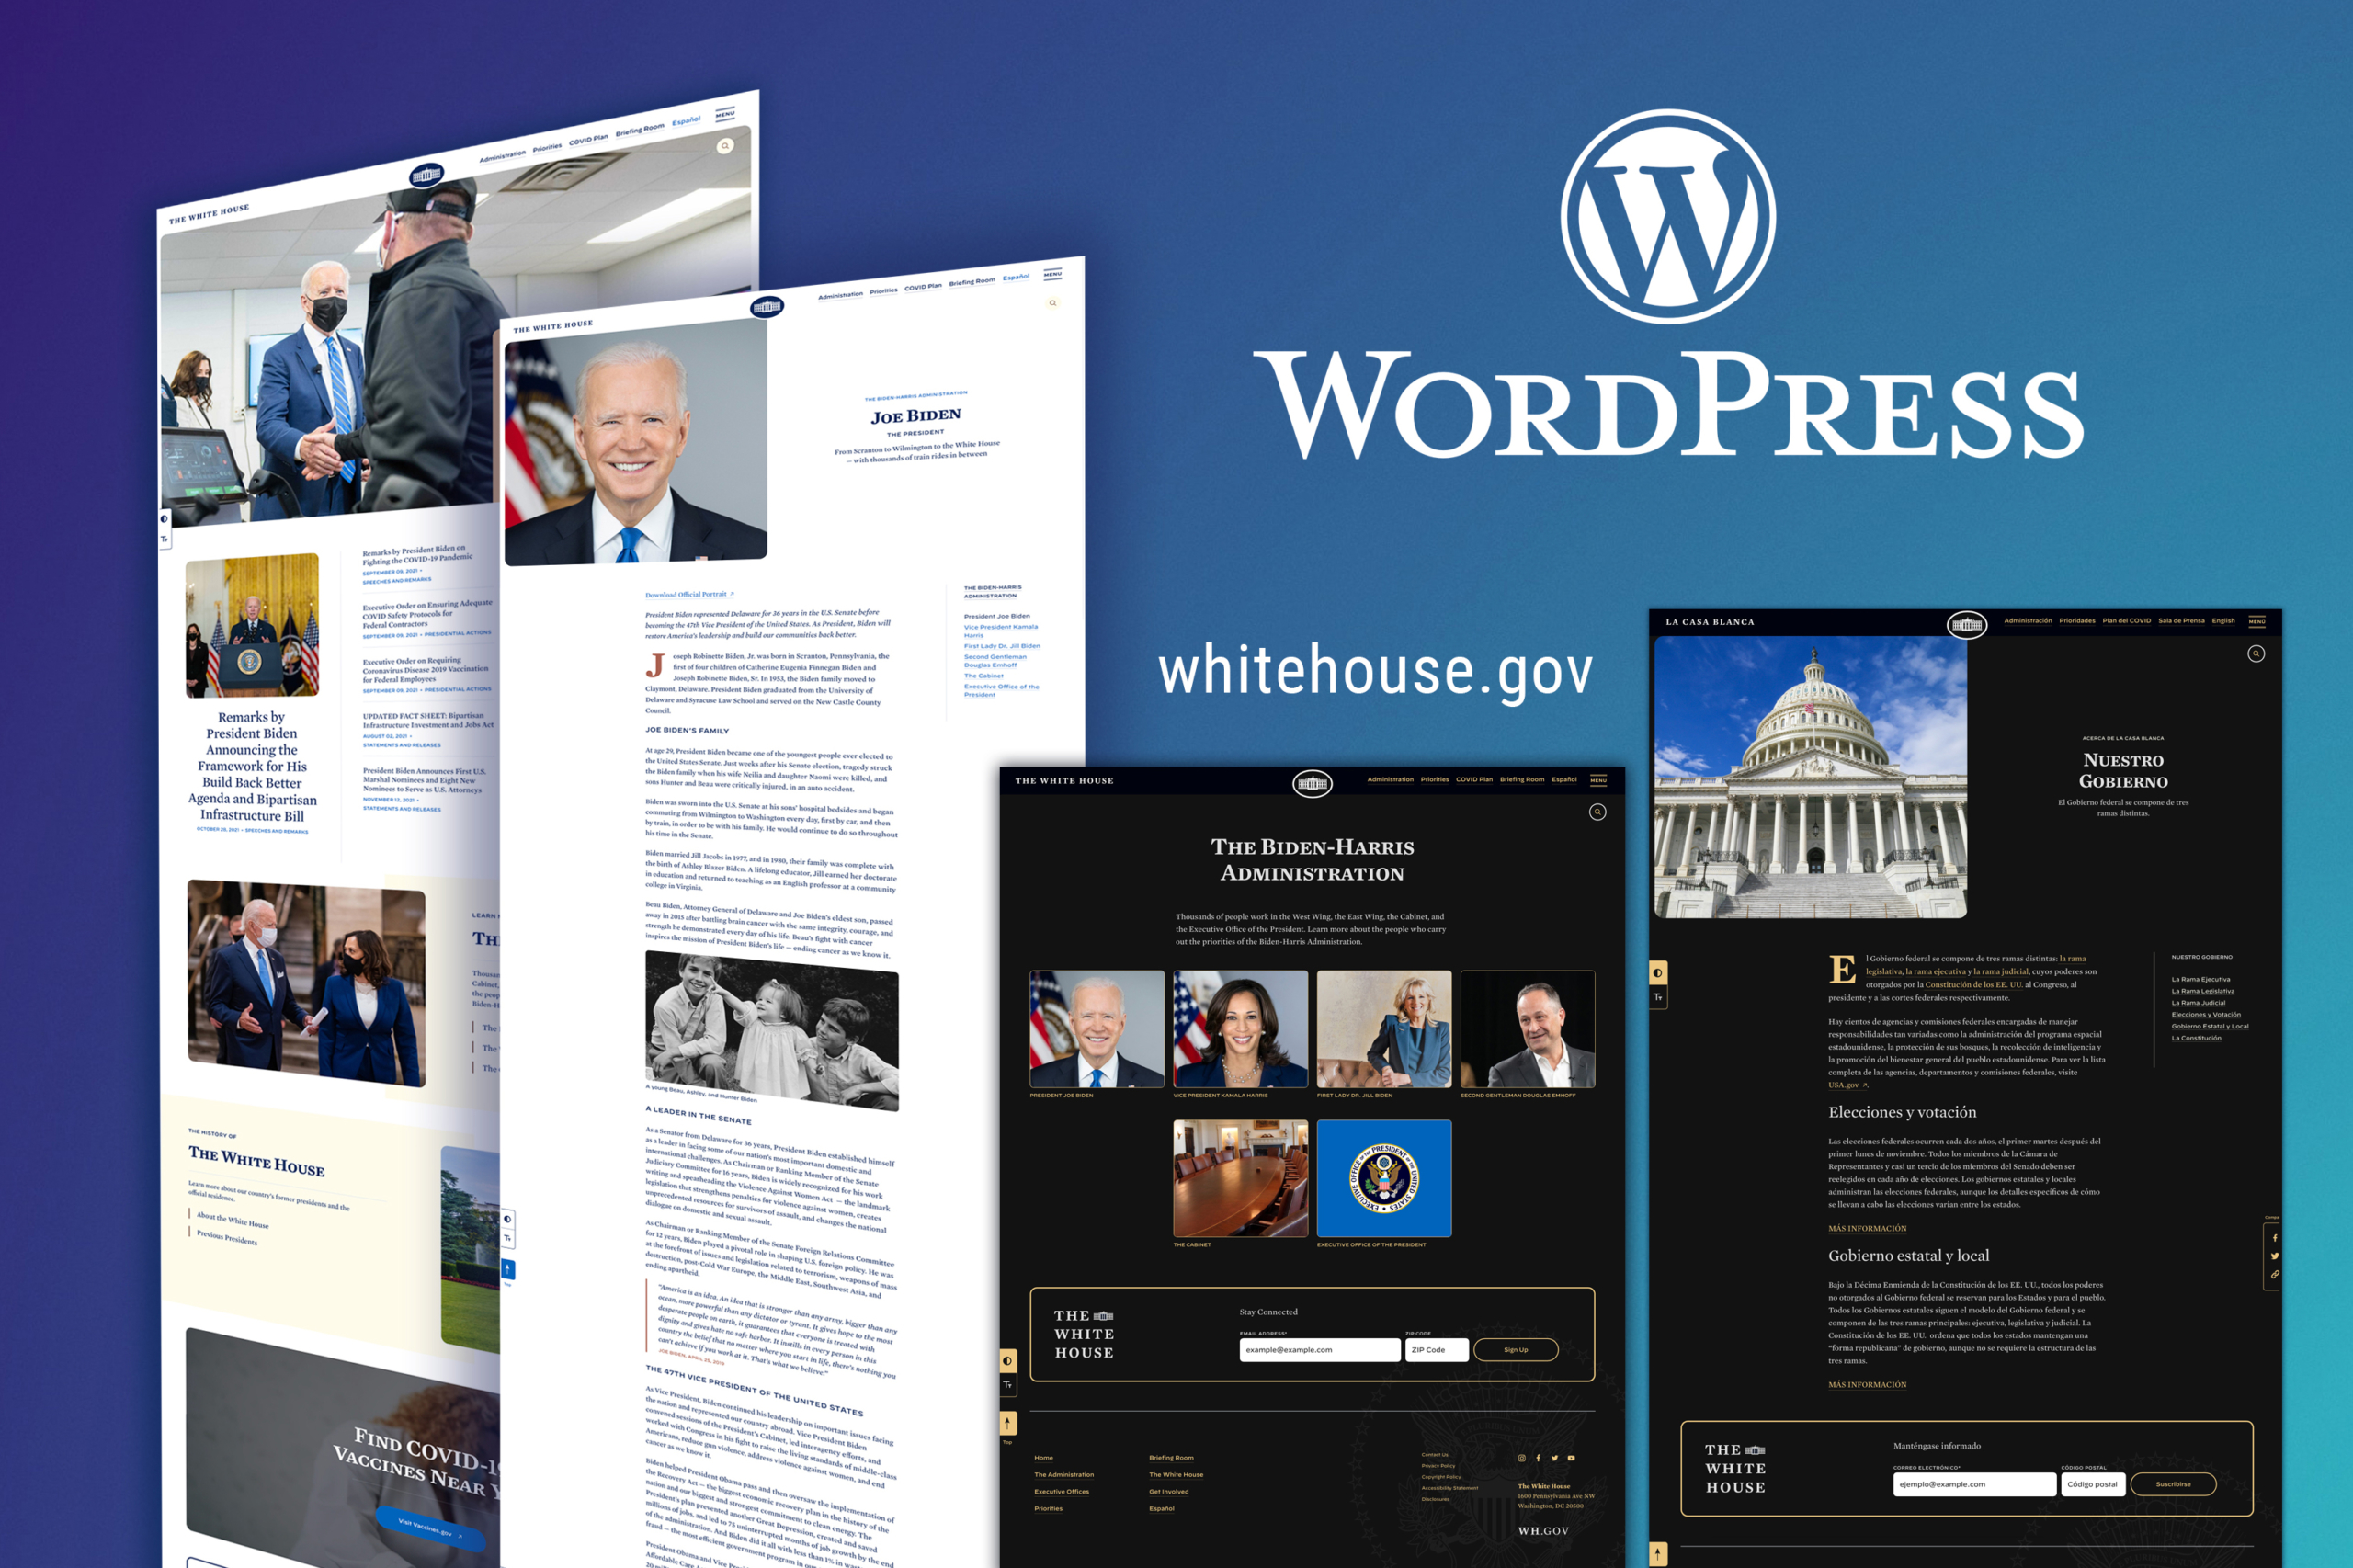 Which are websites like WordPress?